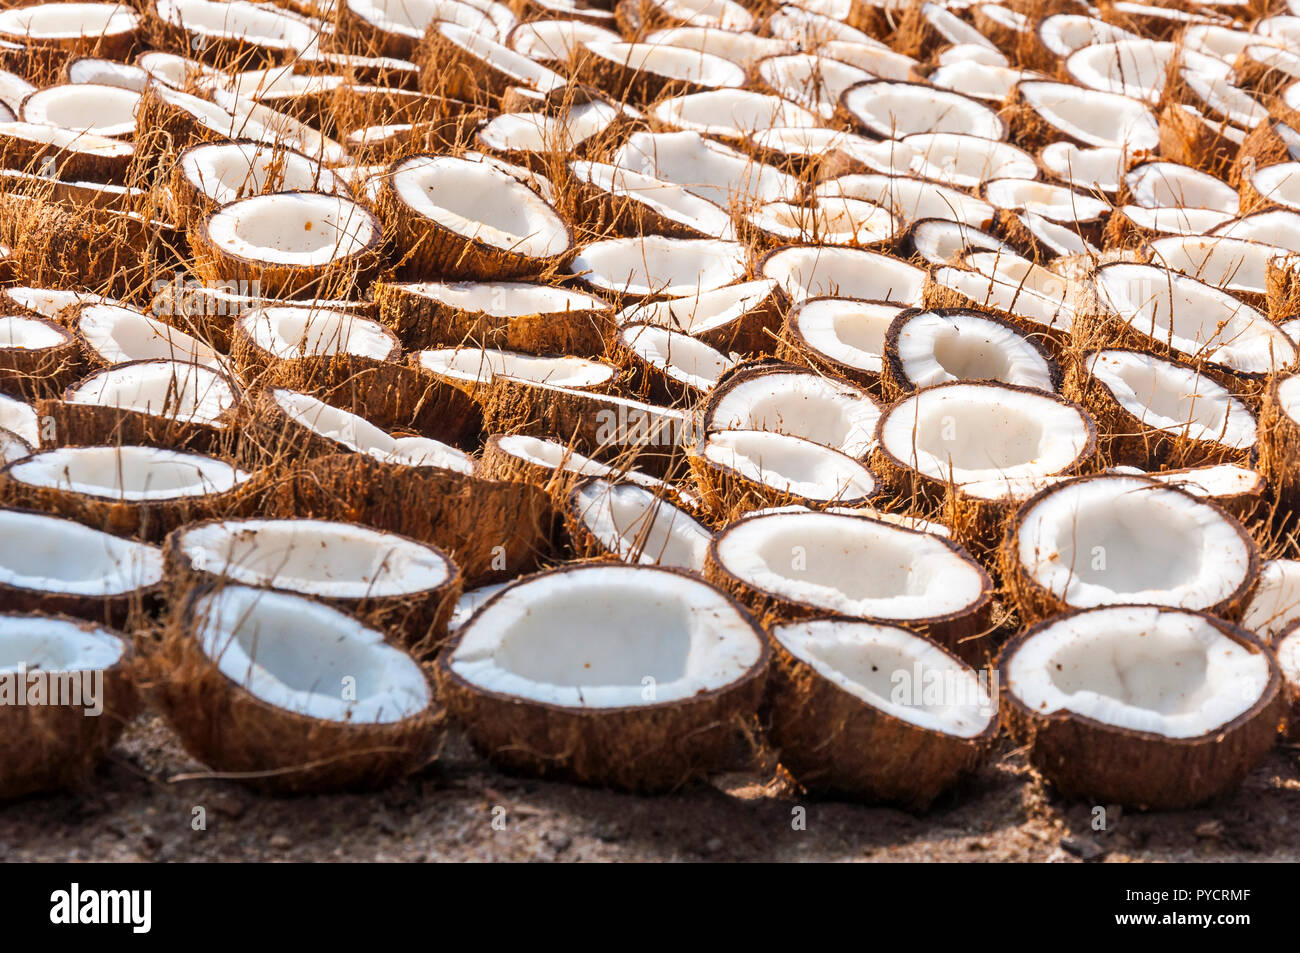 Here you can see the Indian coconut farm and their method of drying ...